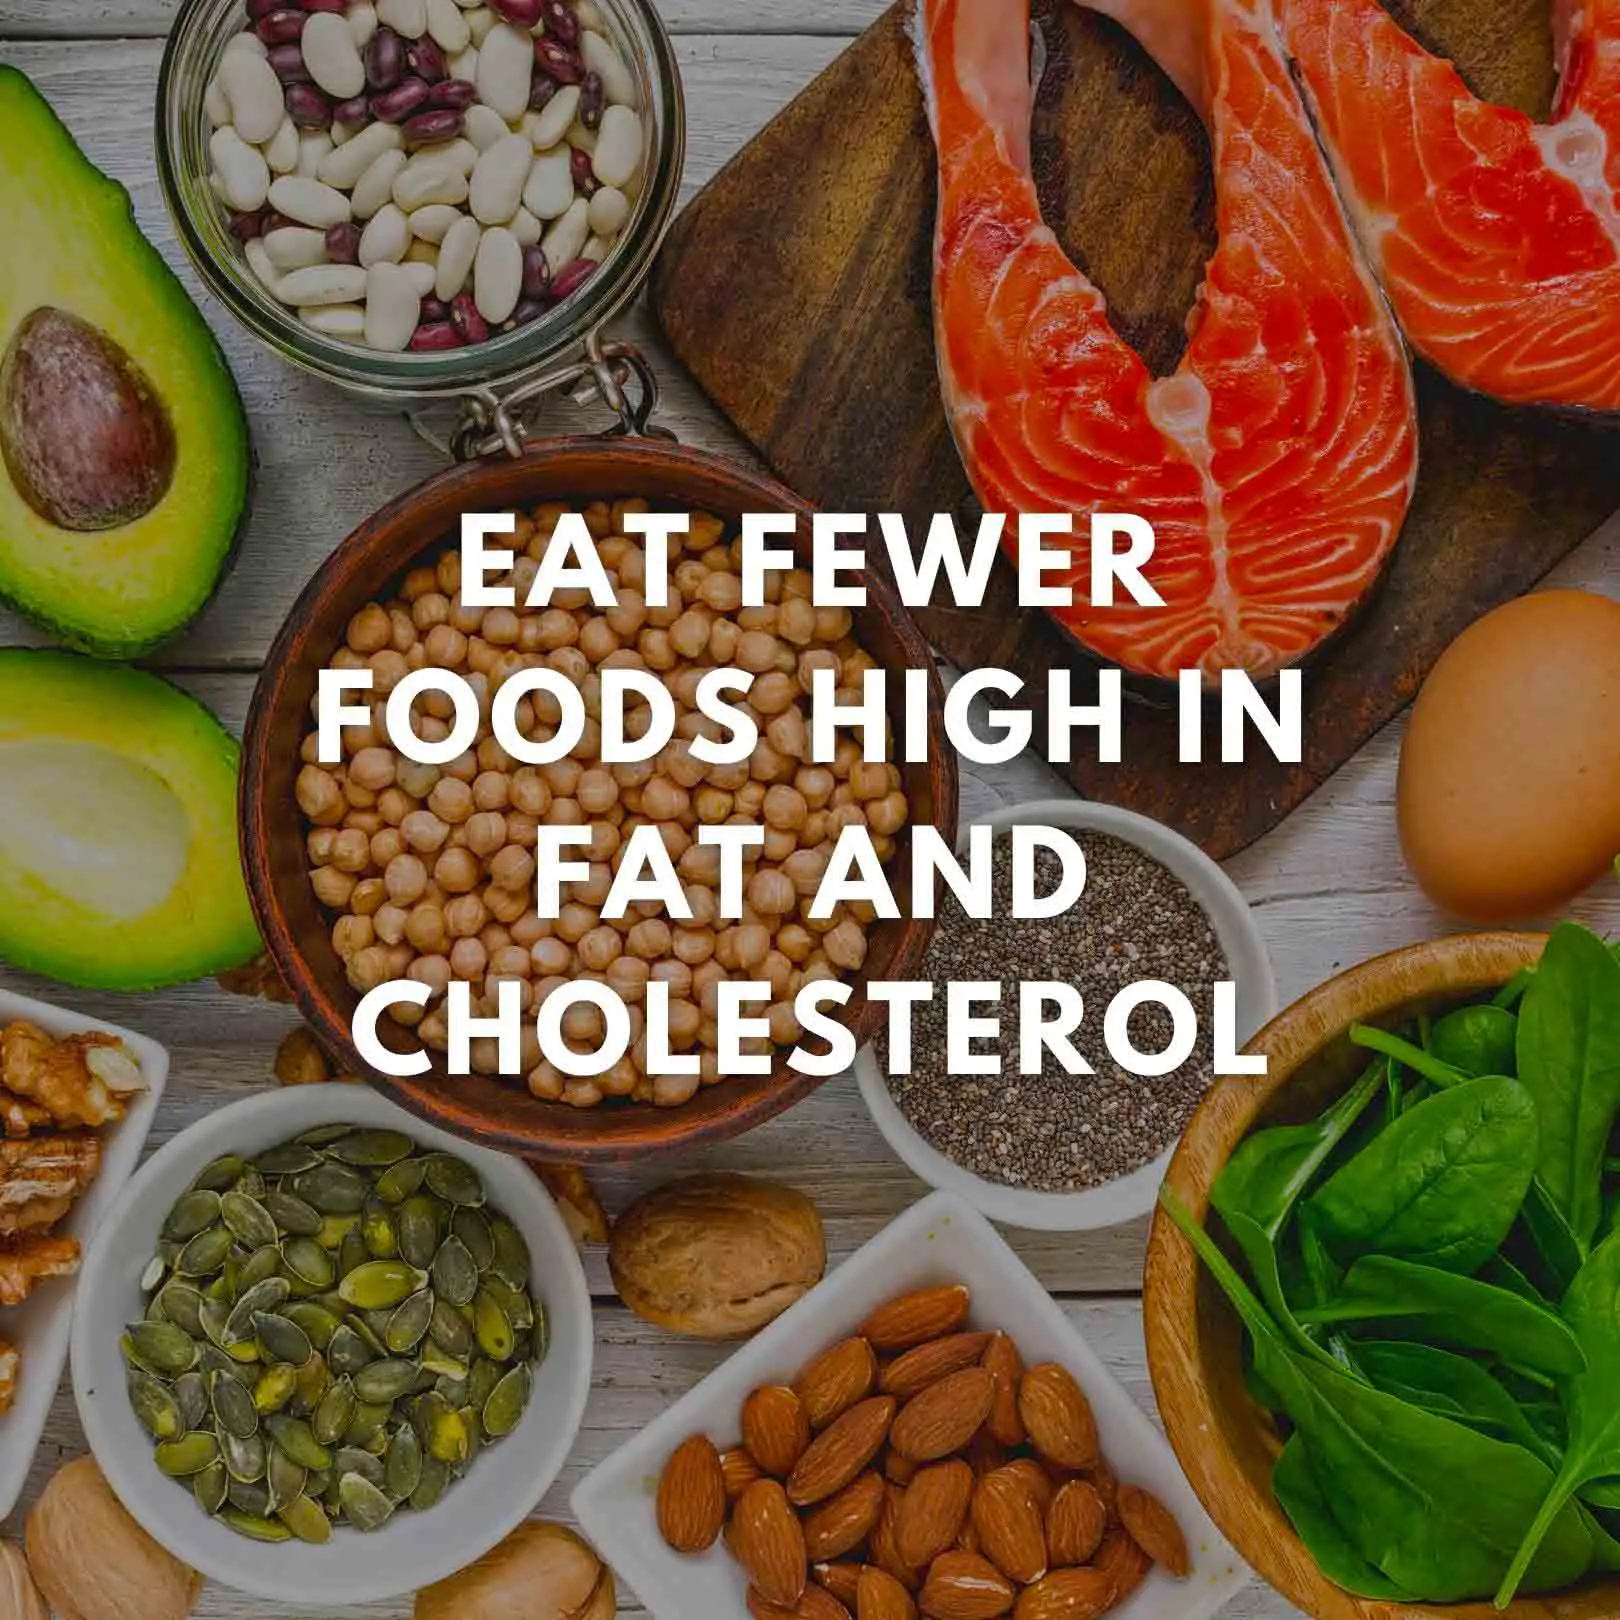 Eat fewer foods high in fat and cholesterol